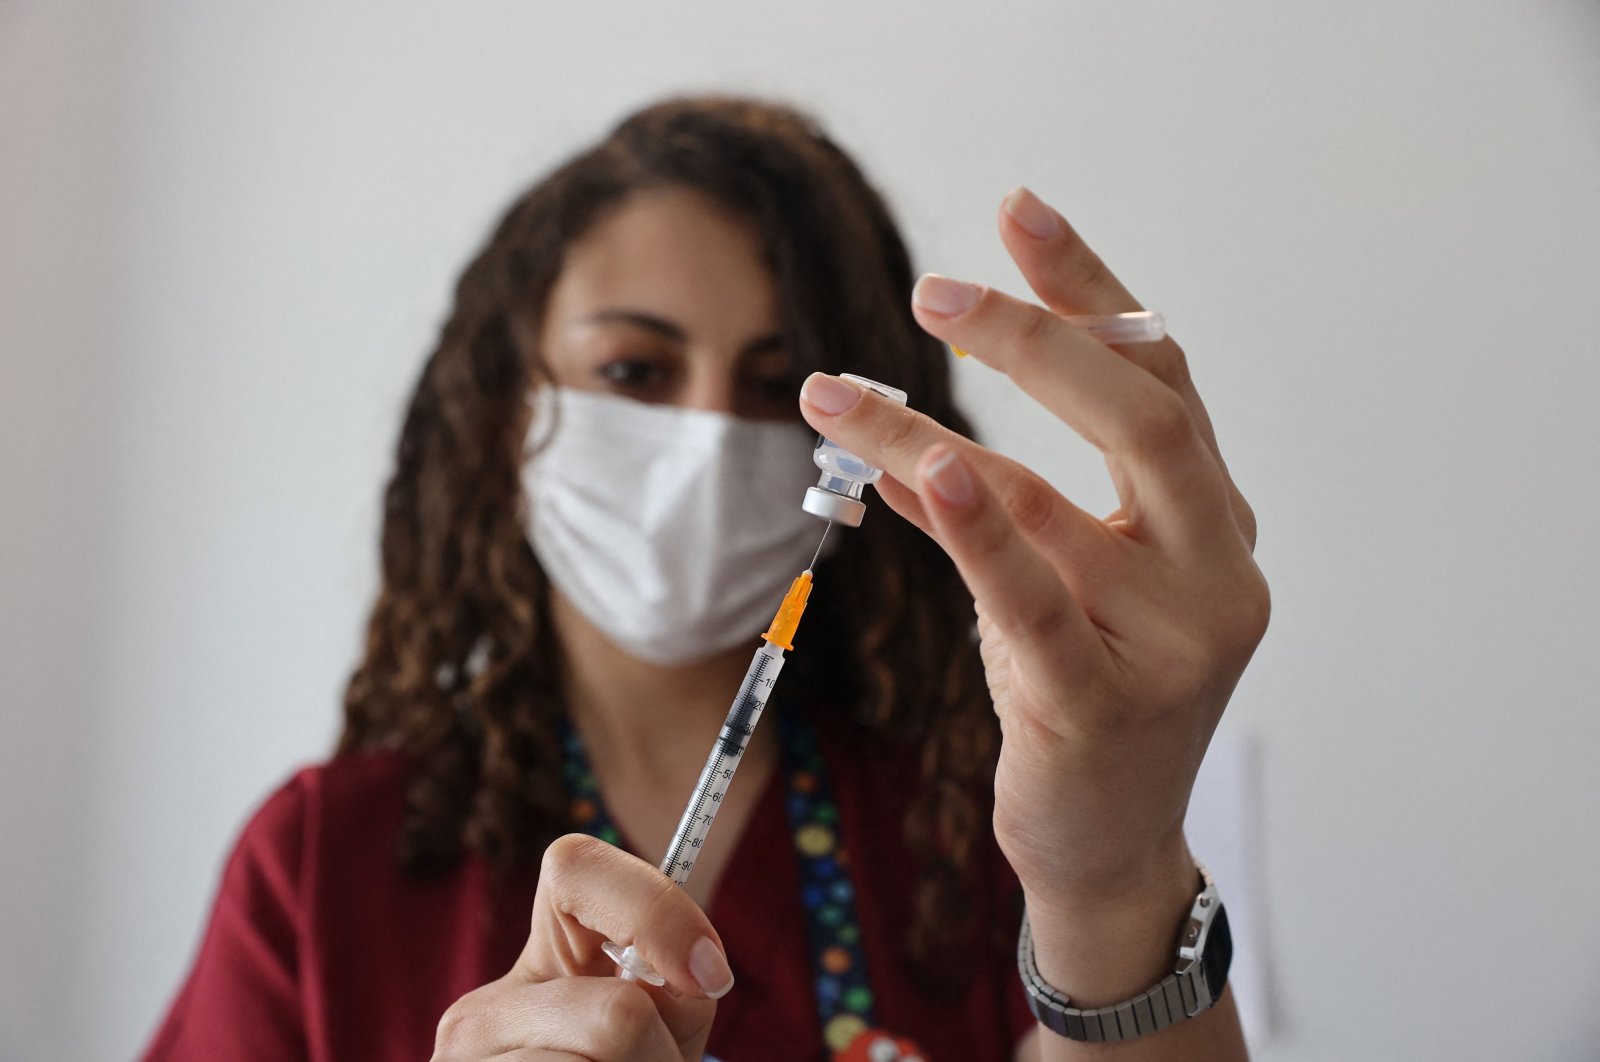 A nurse prepares to administer a second dose of the Pfizer-BioNTech vaccine to a patient, in the capital Ankara, Turkey, May 3, 2021. (AFP PHOTO)